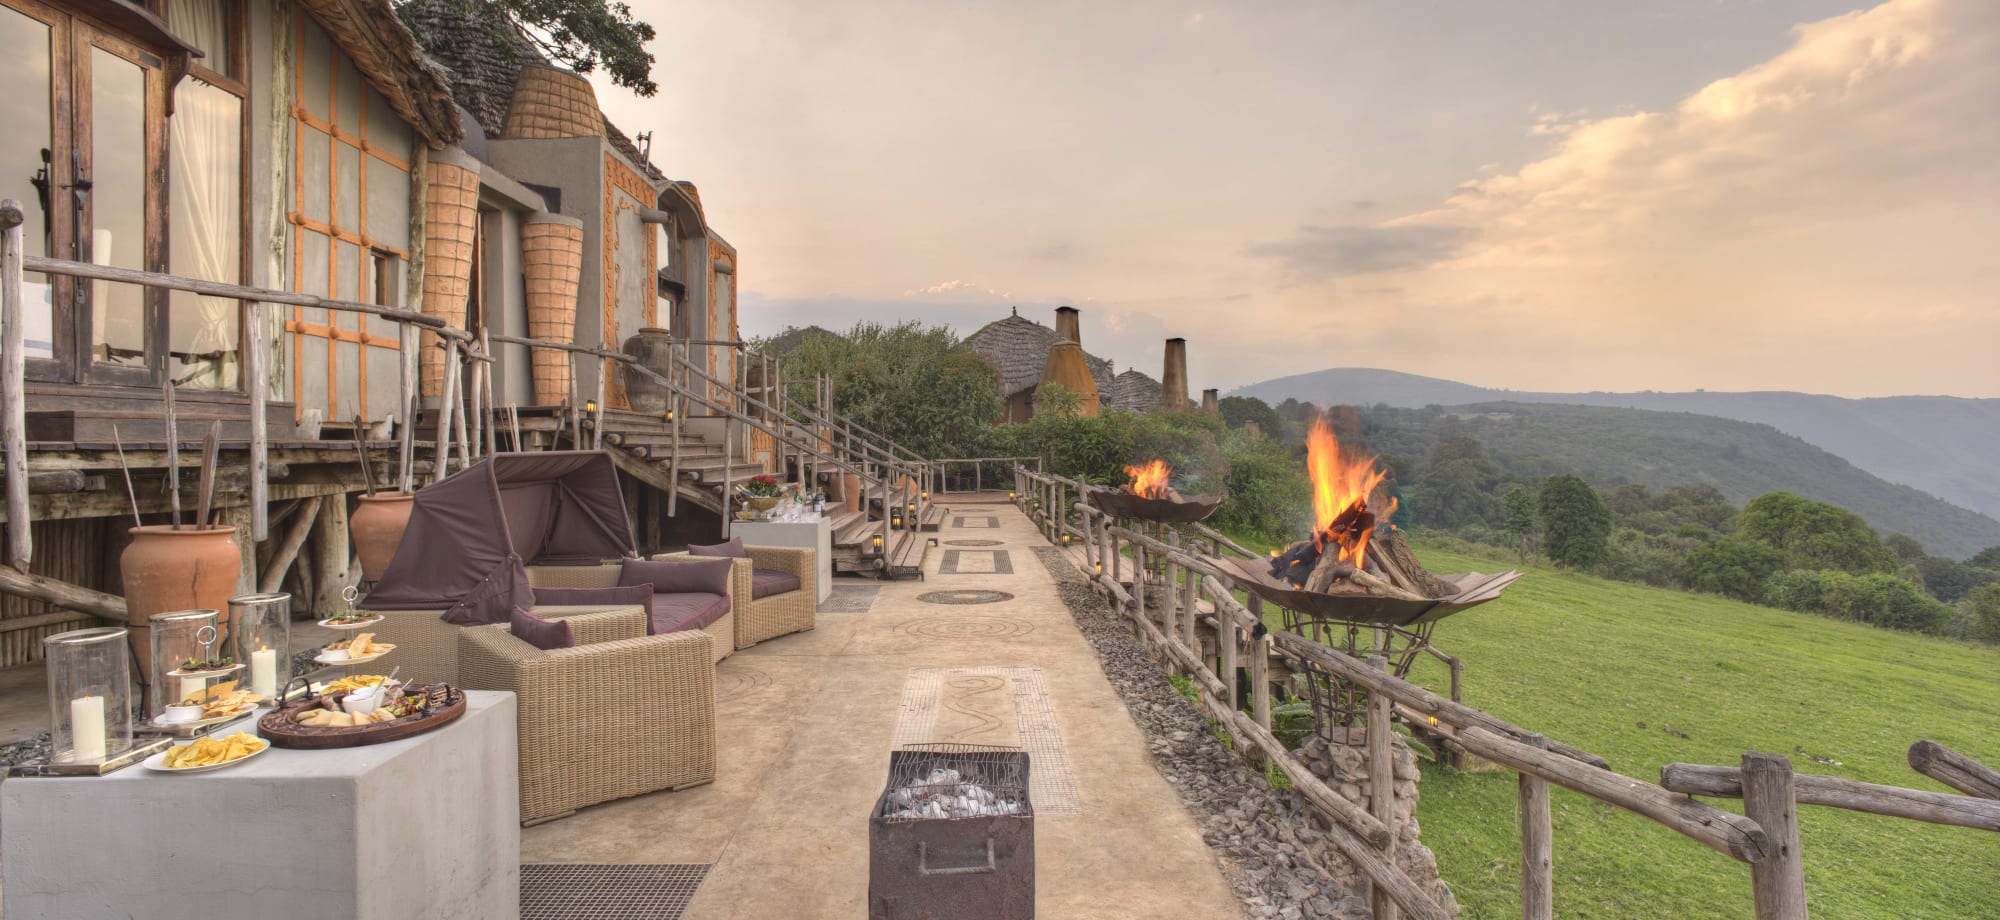 Crater Lodge's outdoor deck with fire pits and sofas